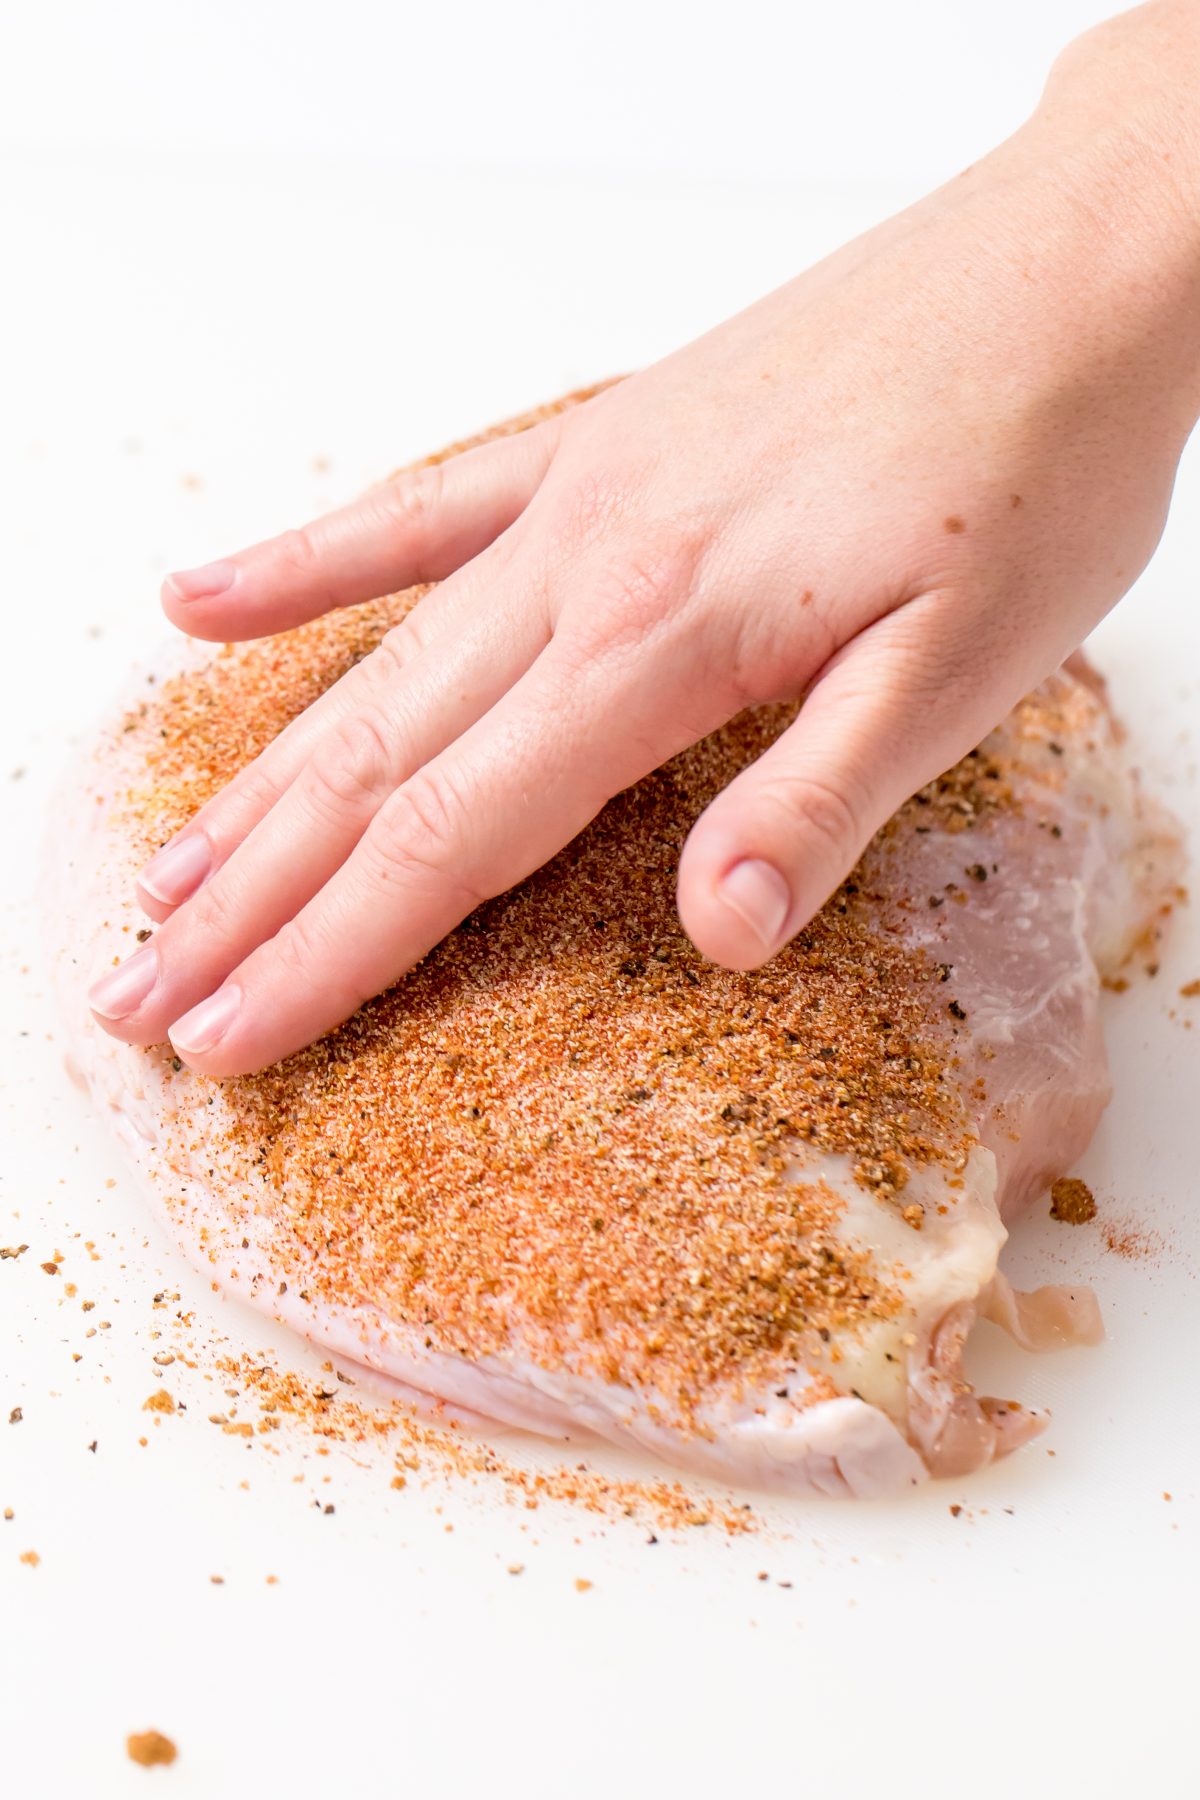 Rub the turkey with the spice mixture